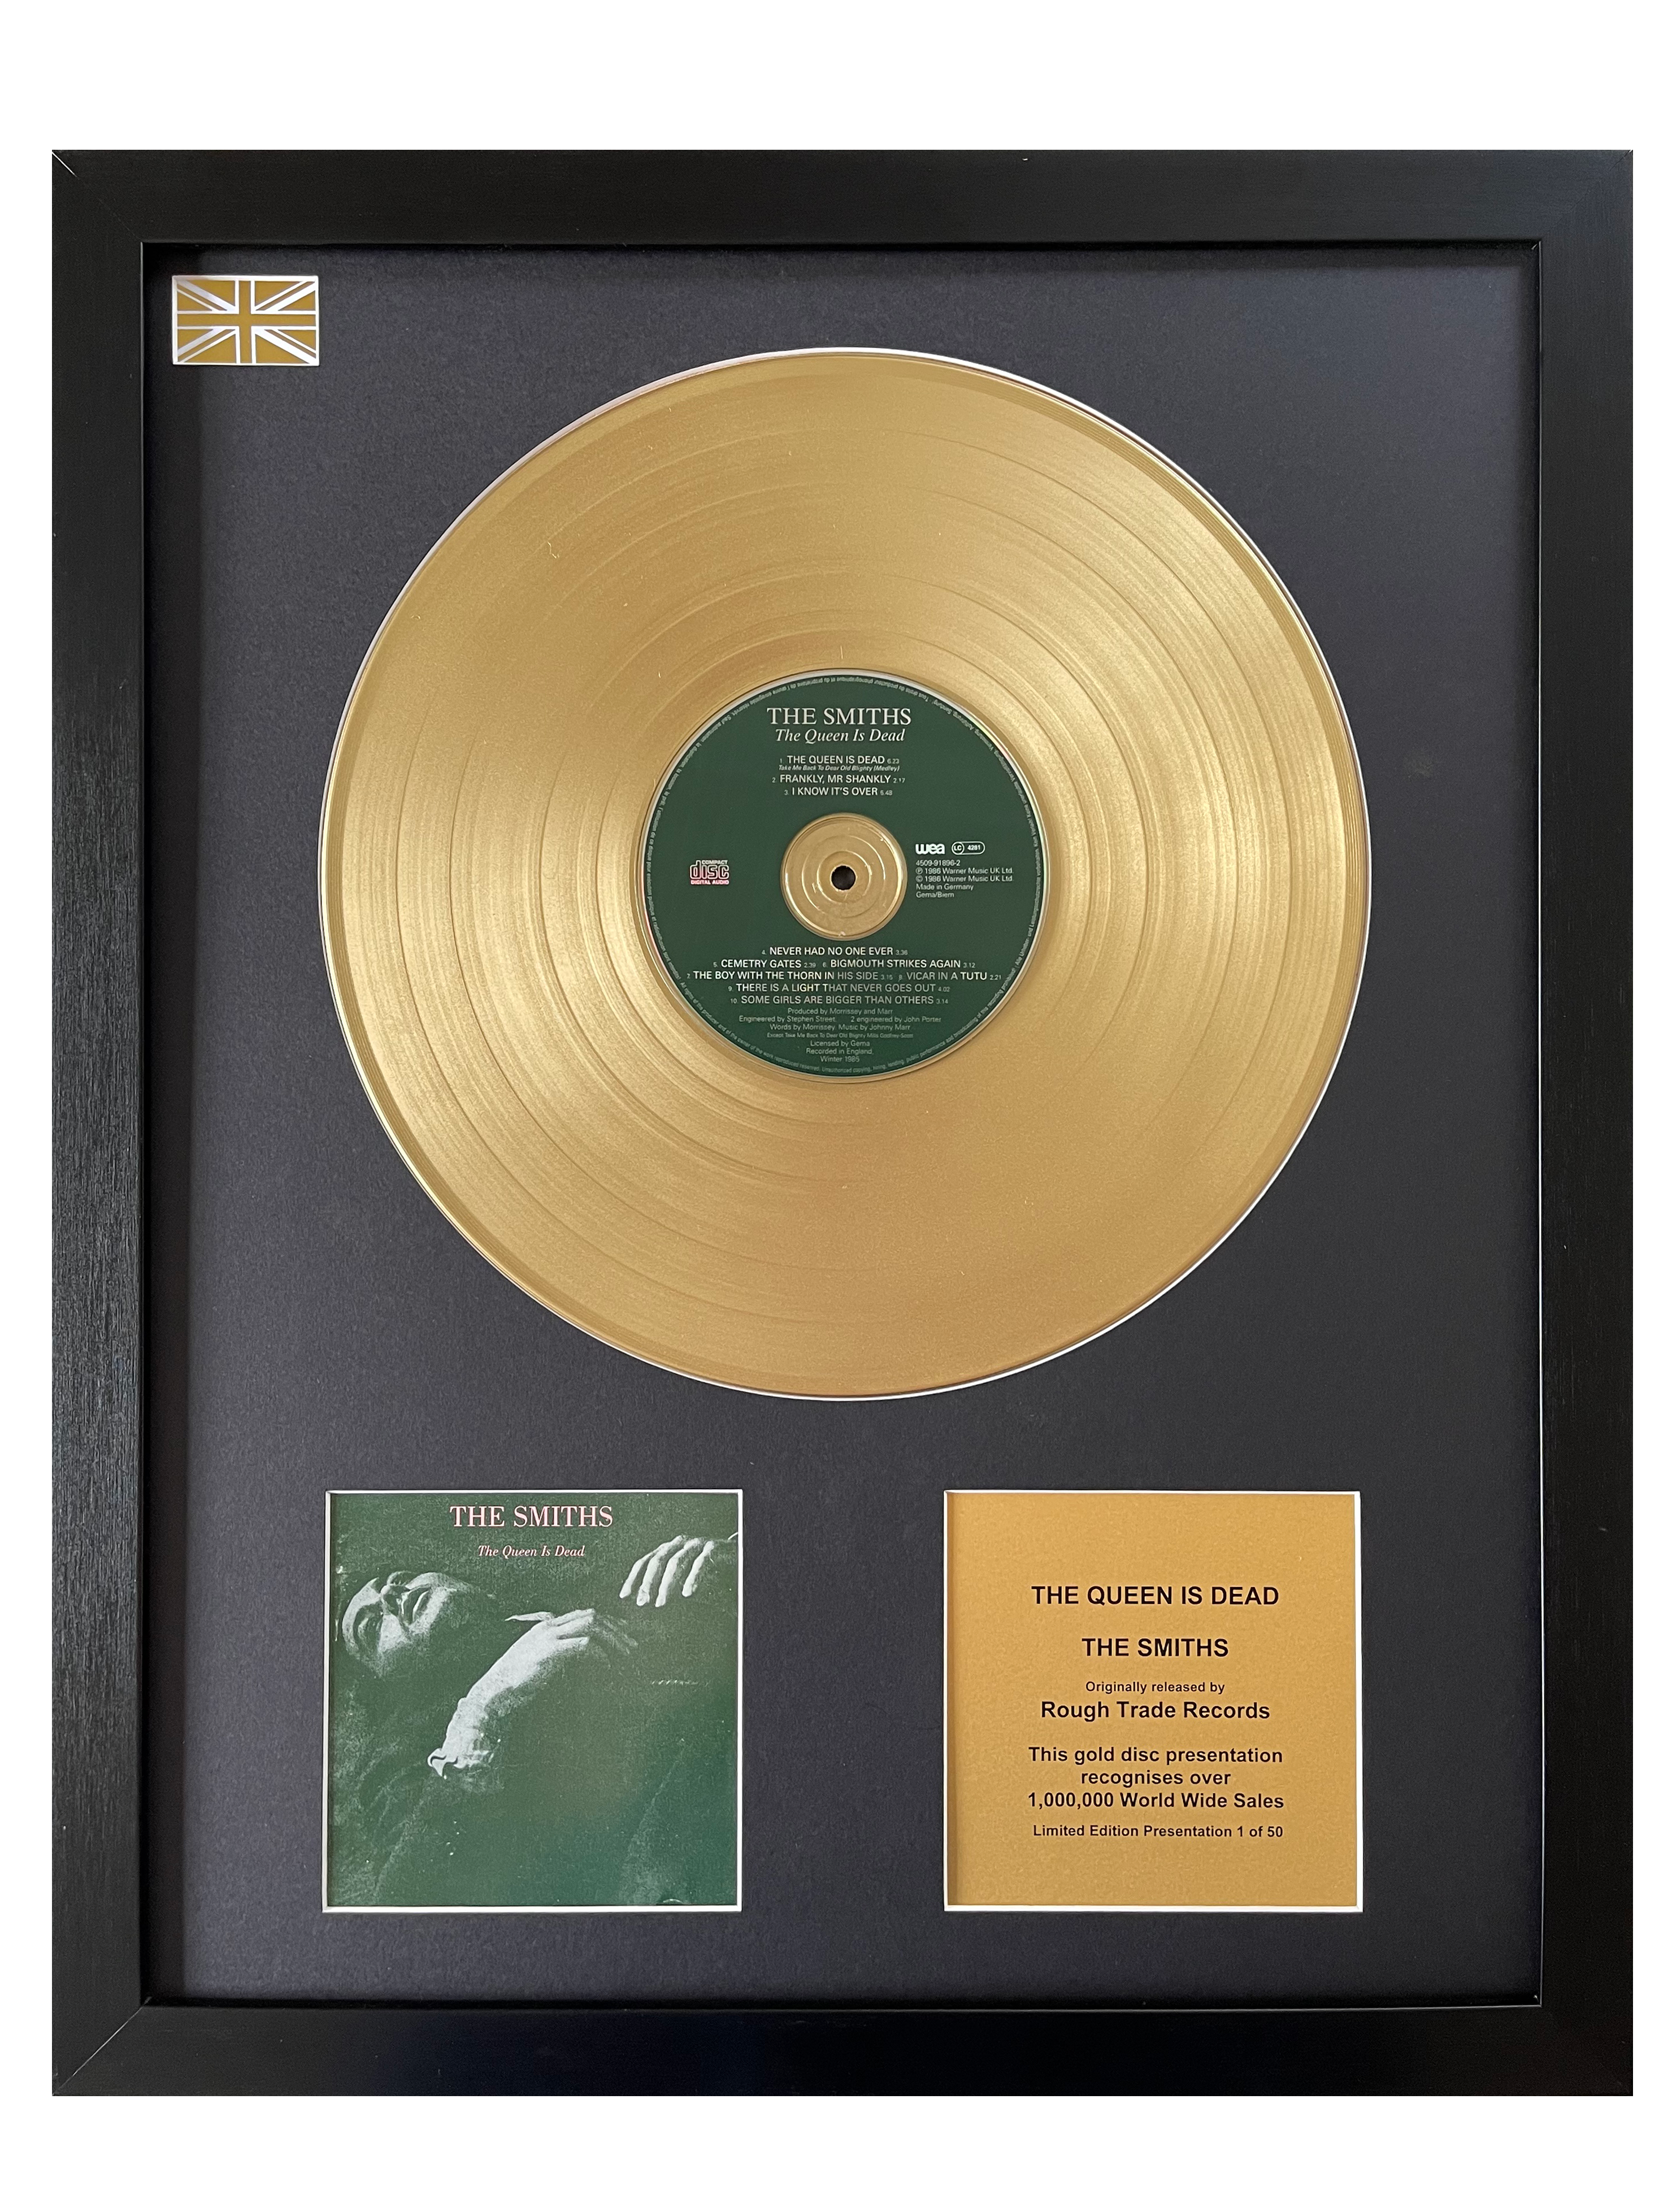 THE SMITHS - The Queen Is Dead - Gold Disc